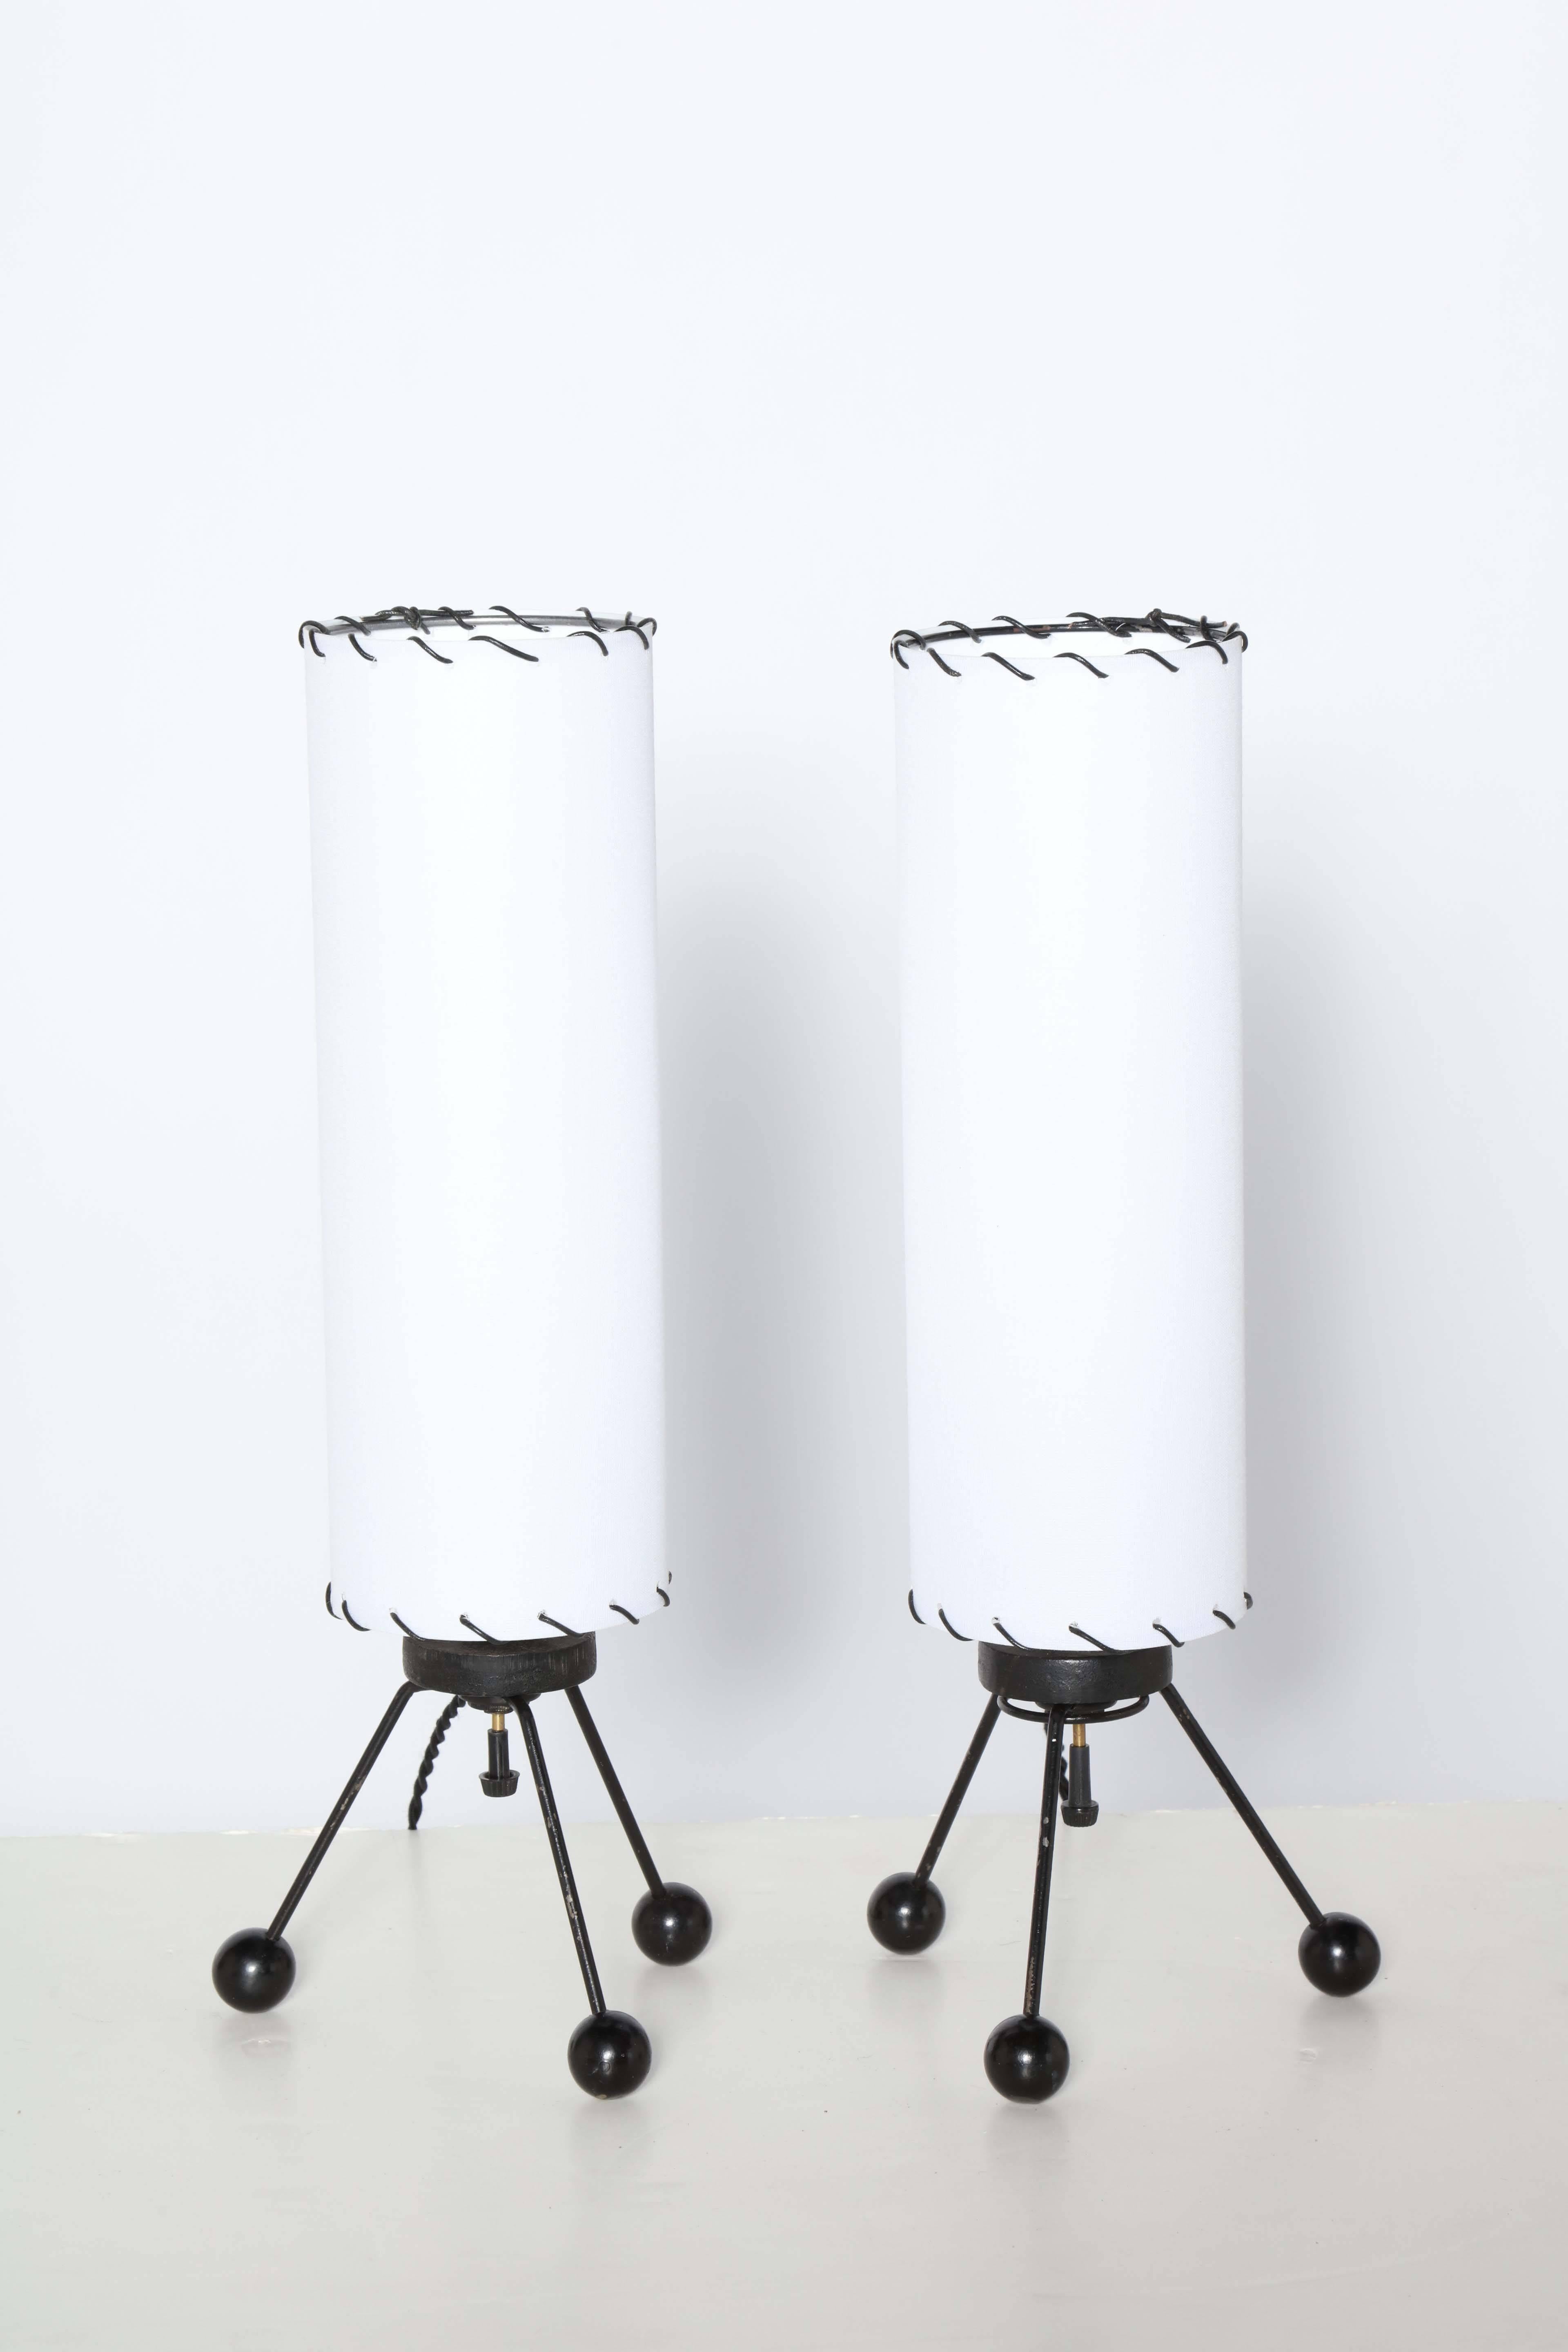 Smaller American Atomic Black Wire Tripod Lamps with White Linen Shades by The Verplex Company, C. 1950. Featuring tripod Black wire legs, round Black wooden ball feet and slim, cylindrical newly covered White linen shades with Black whipstitch